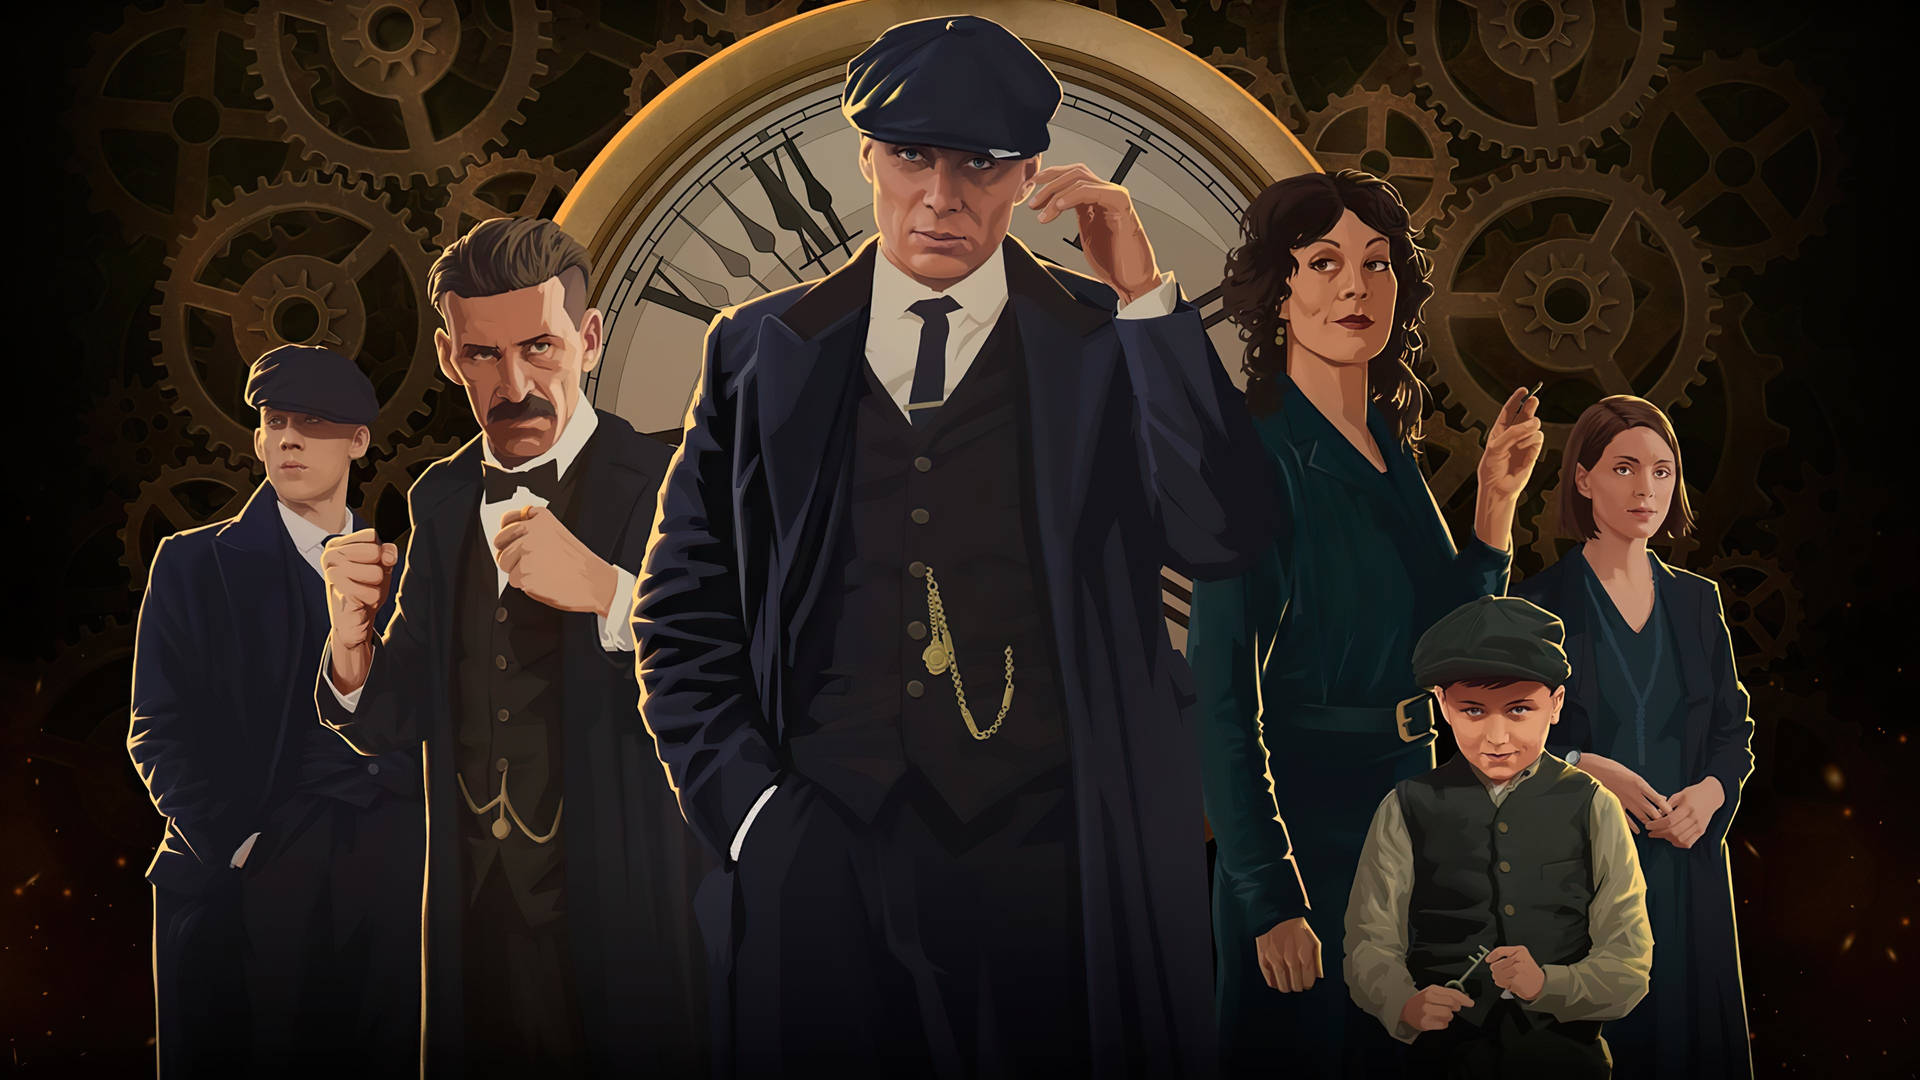 The Shelby Family Peaky Blinders 8k